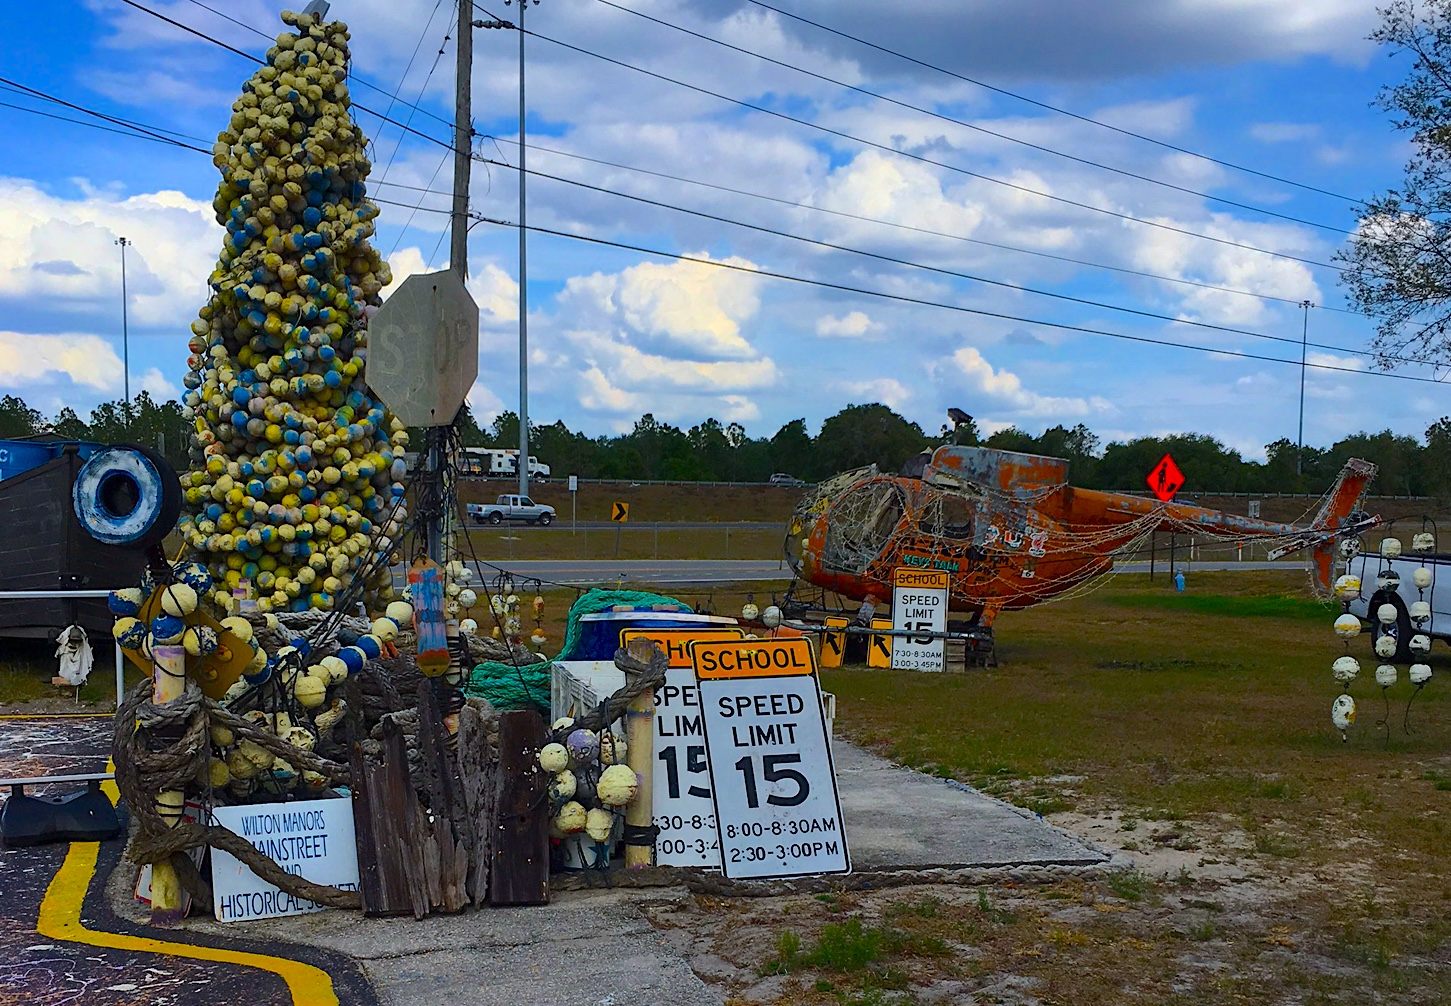 The Enchanted Forest: A Kitschy Old-Fashioned Roadside Attraction